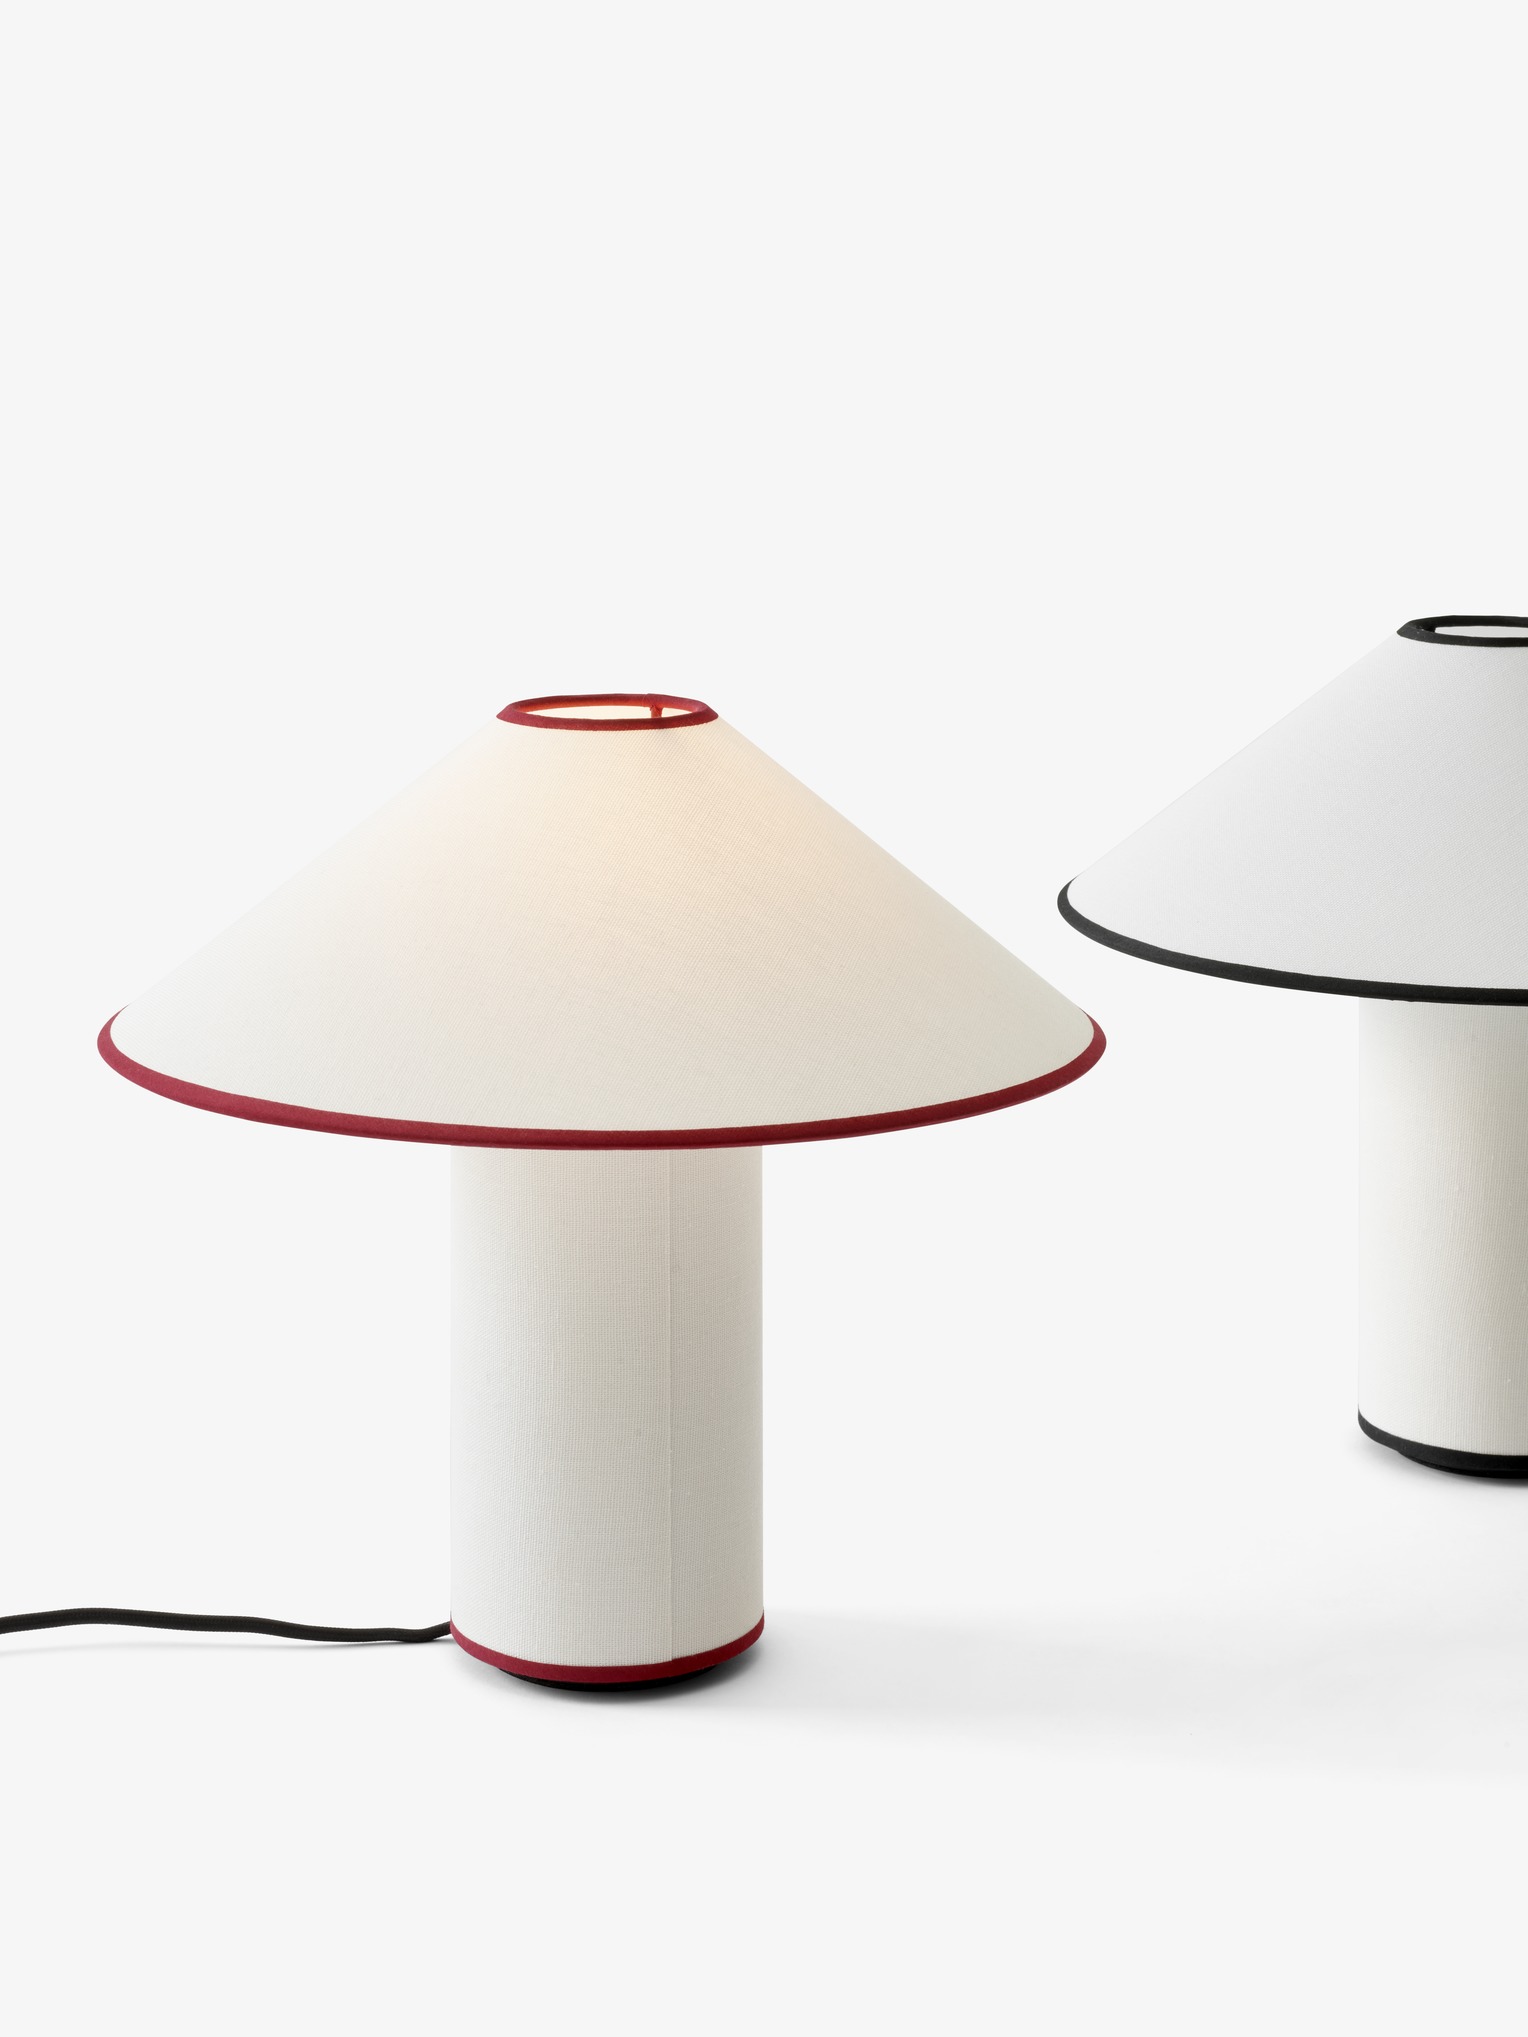 A couple of &tradition Colette Table Lamps sitting next to each other.